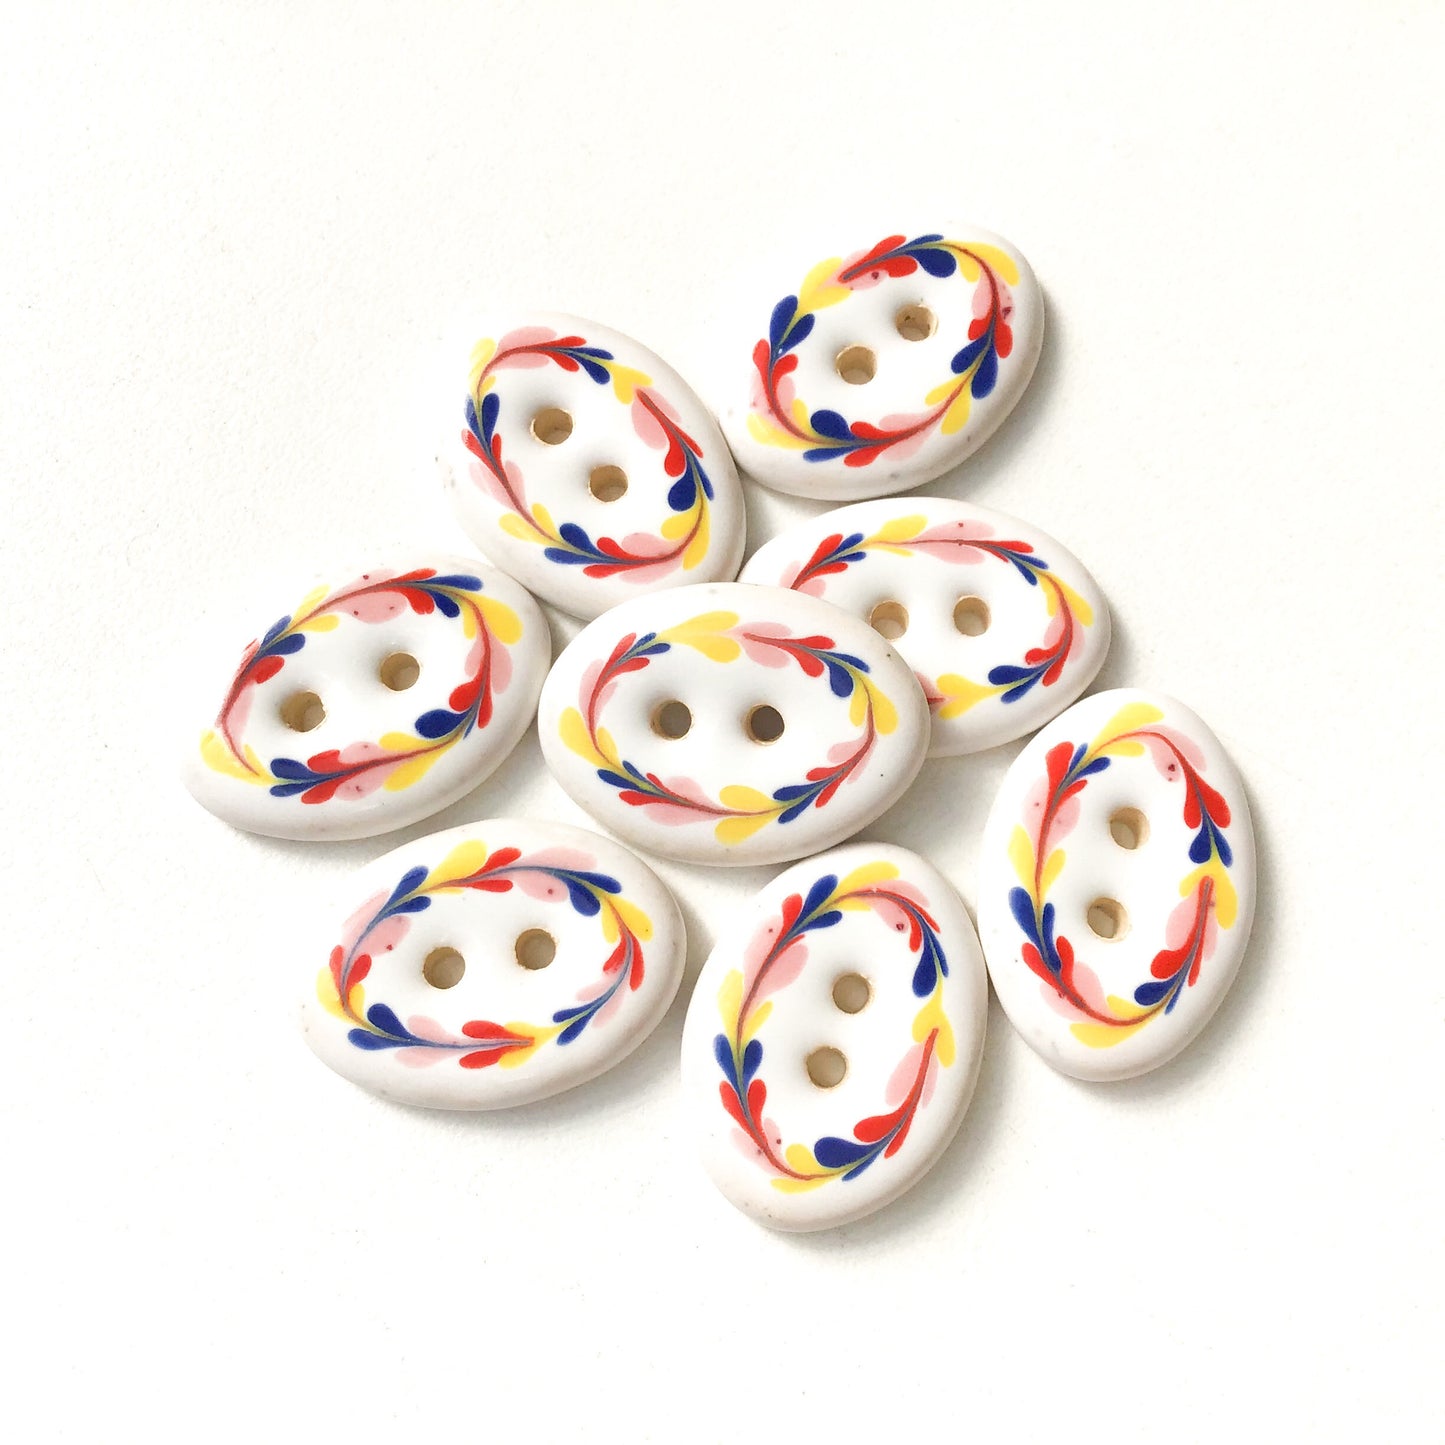 White Ceramic Buttons with Colorful Floral Wreath - Oval Clay Buttons - 5/8" x 7/8" - 8 Pack